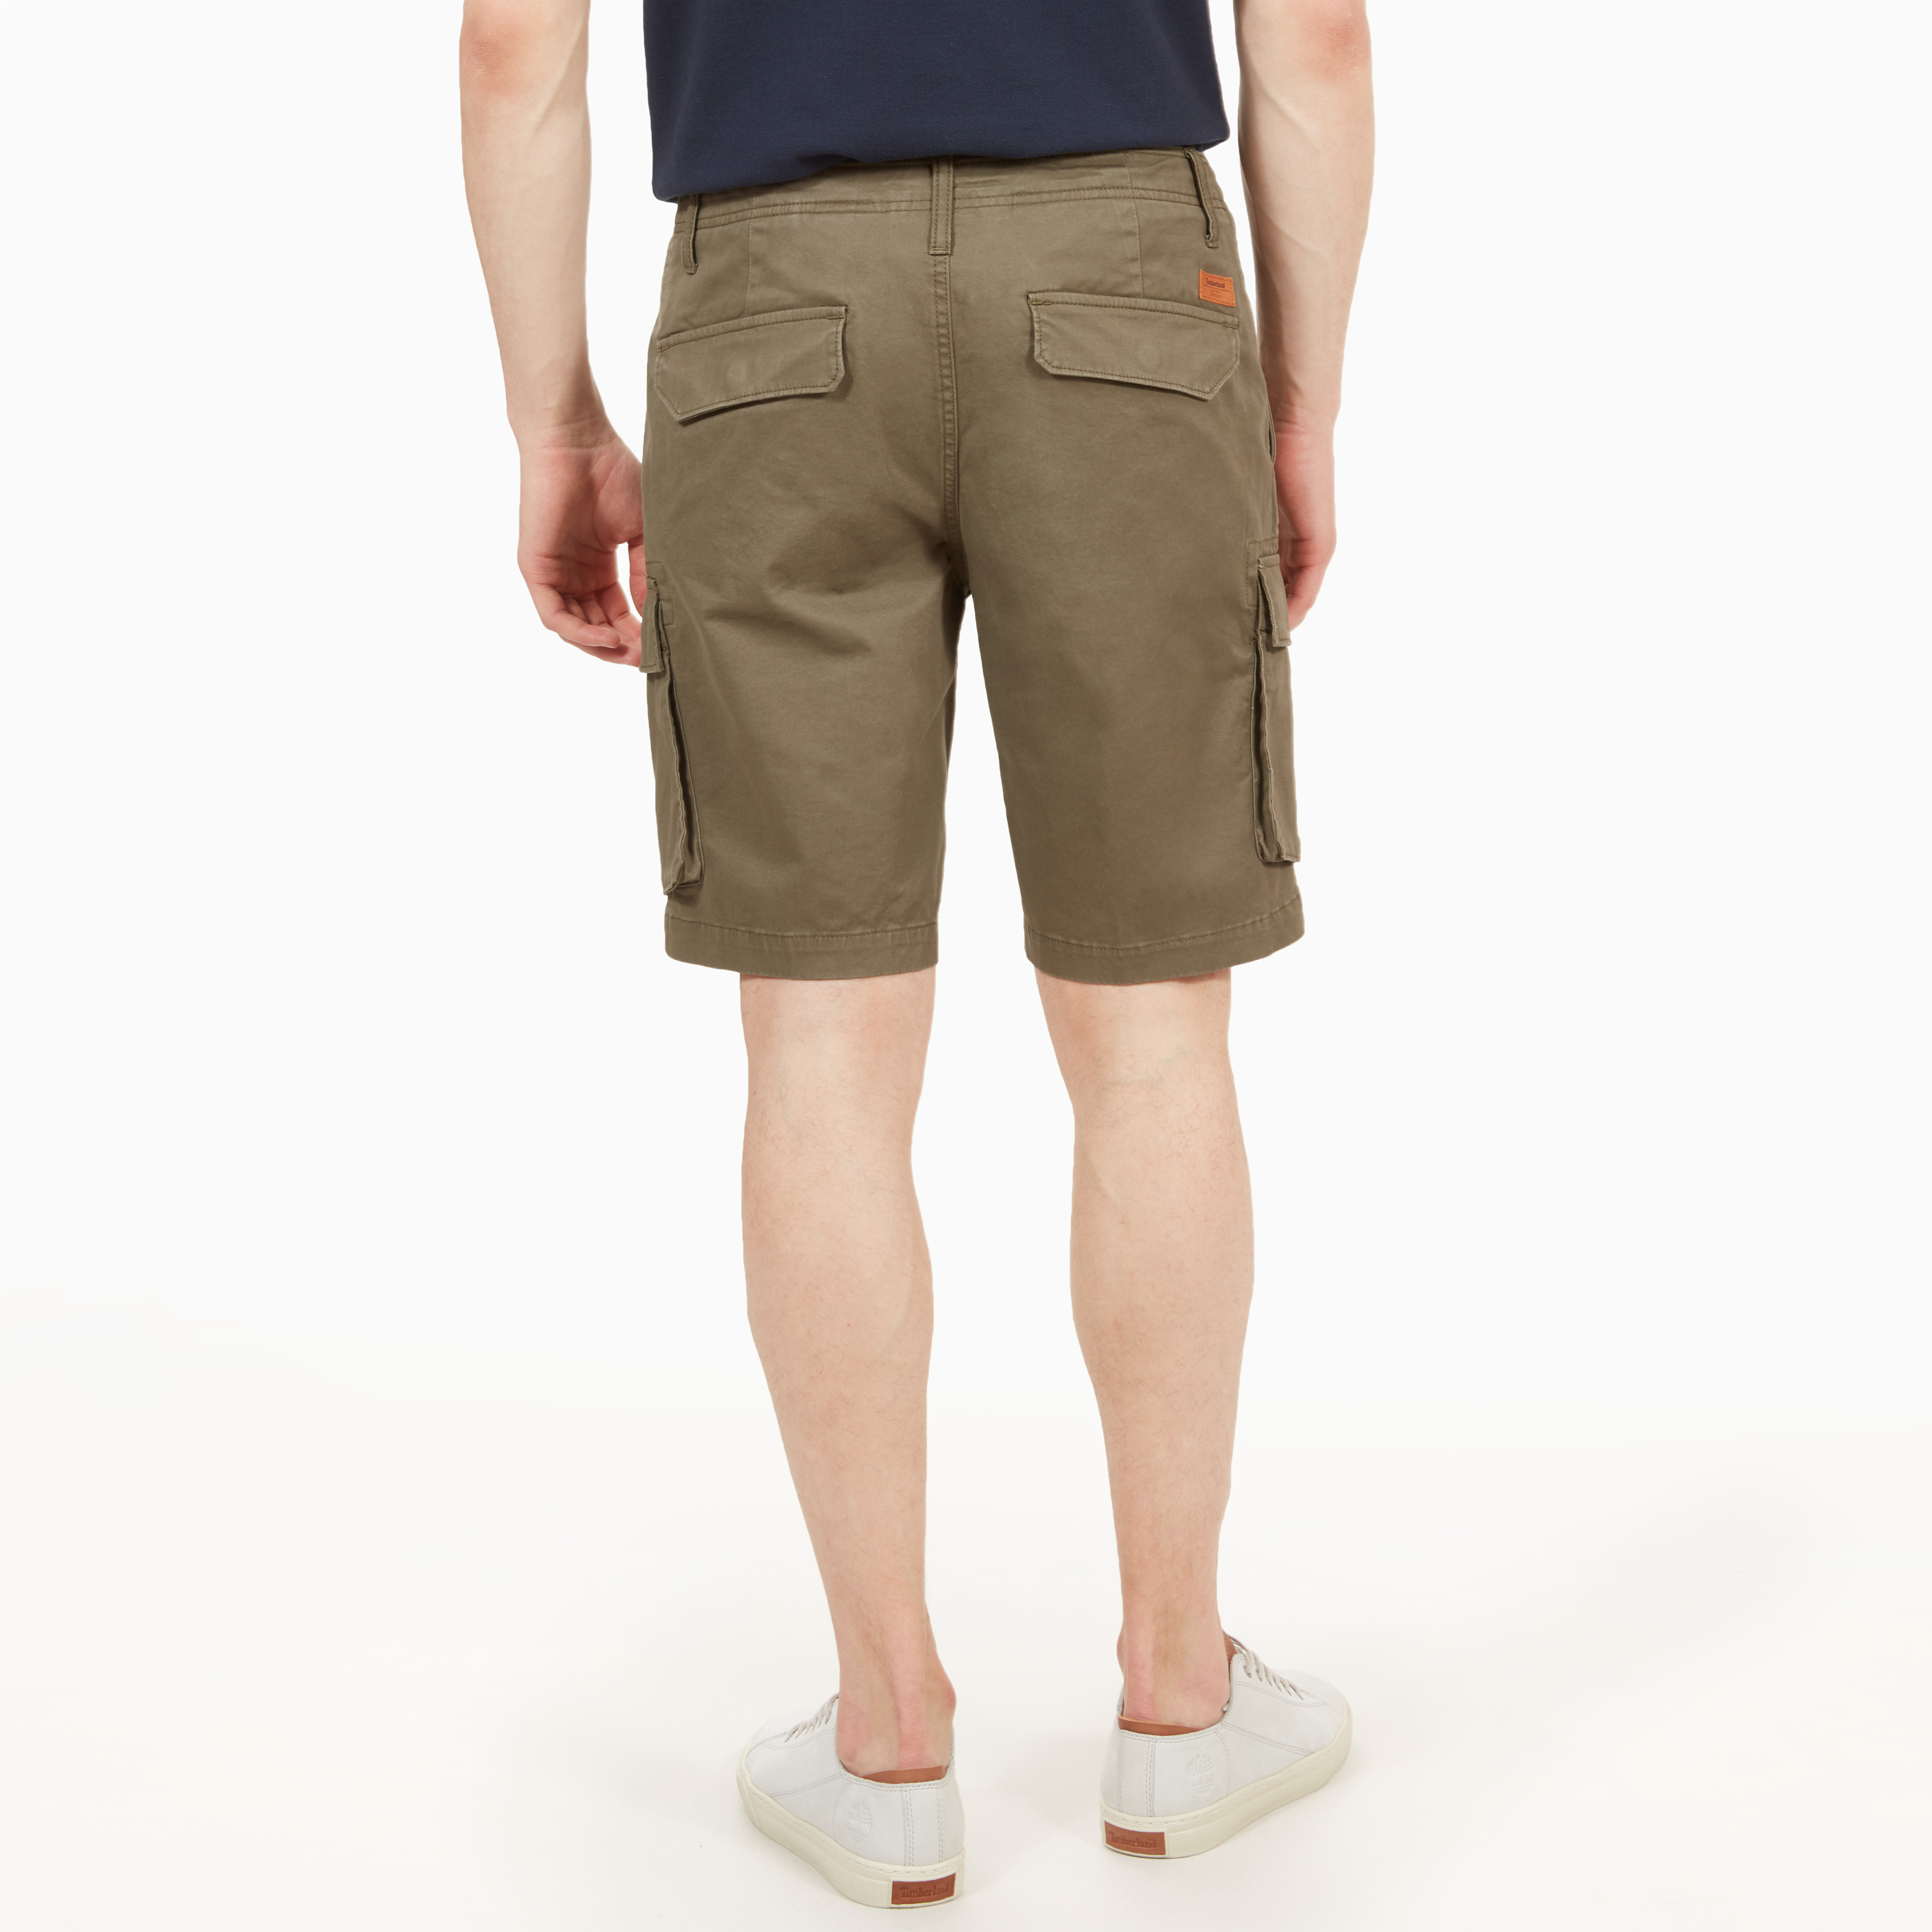 Webster Twill Classic Short